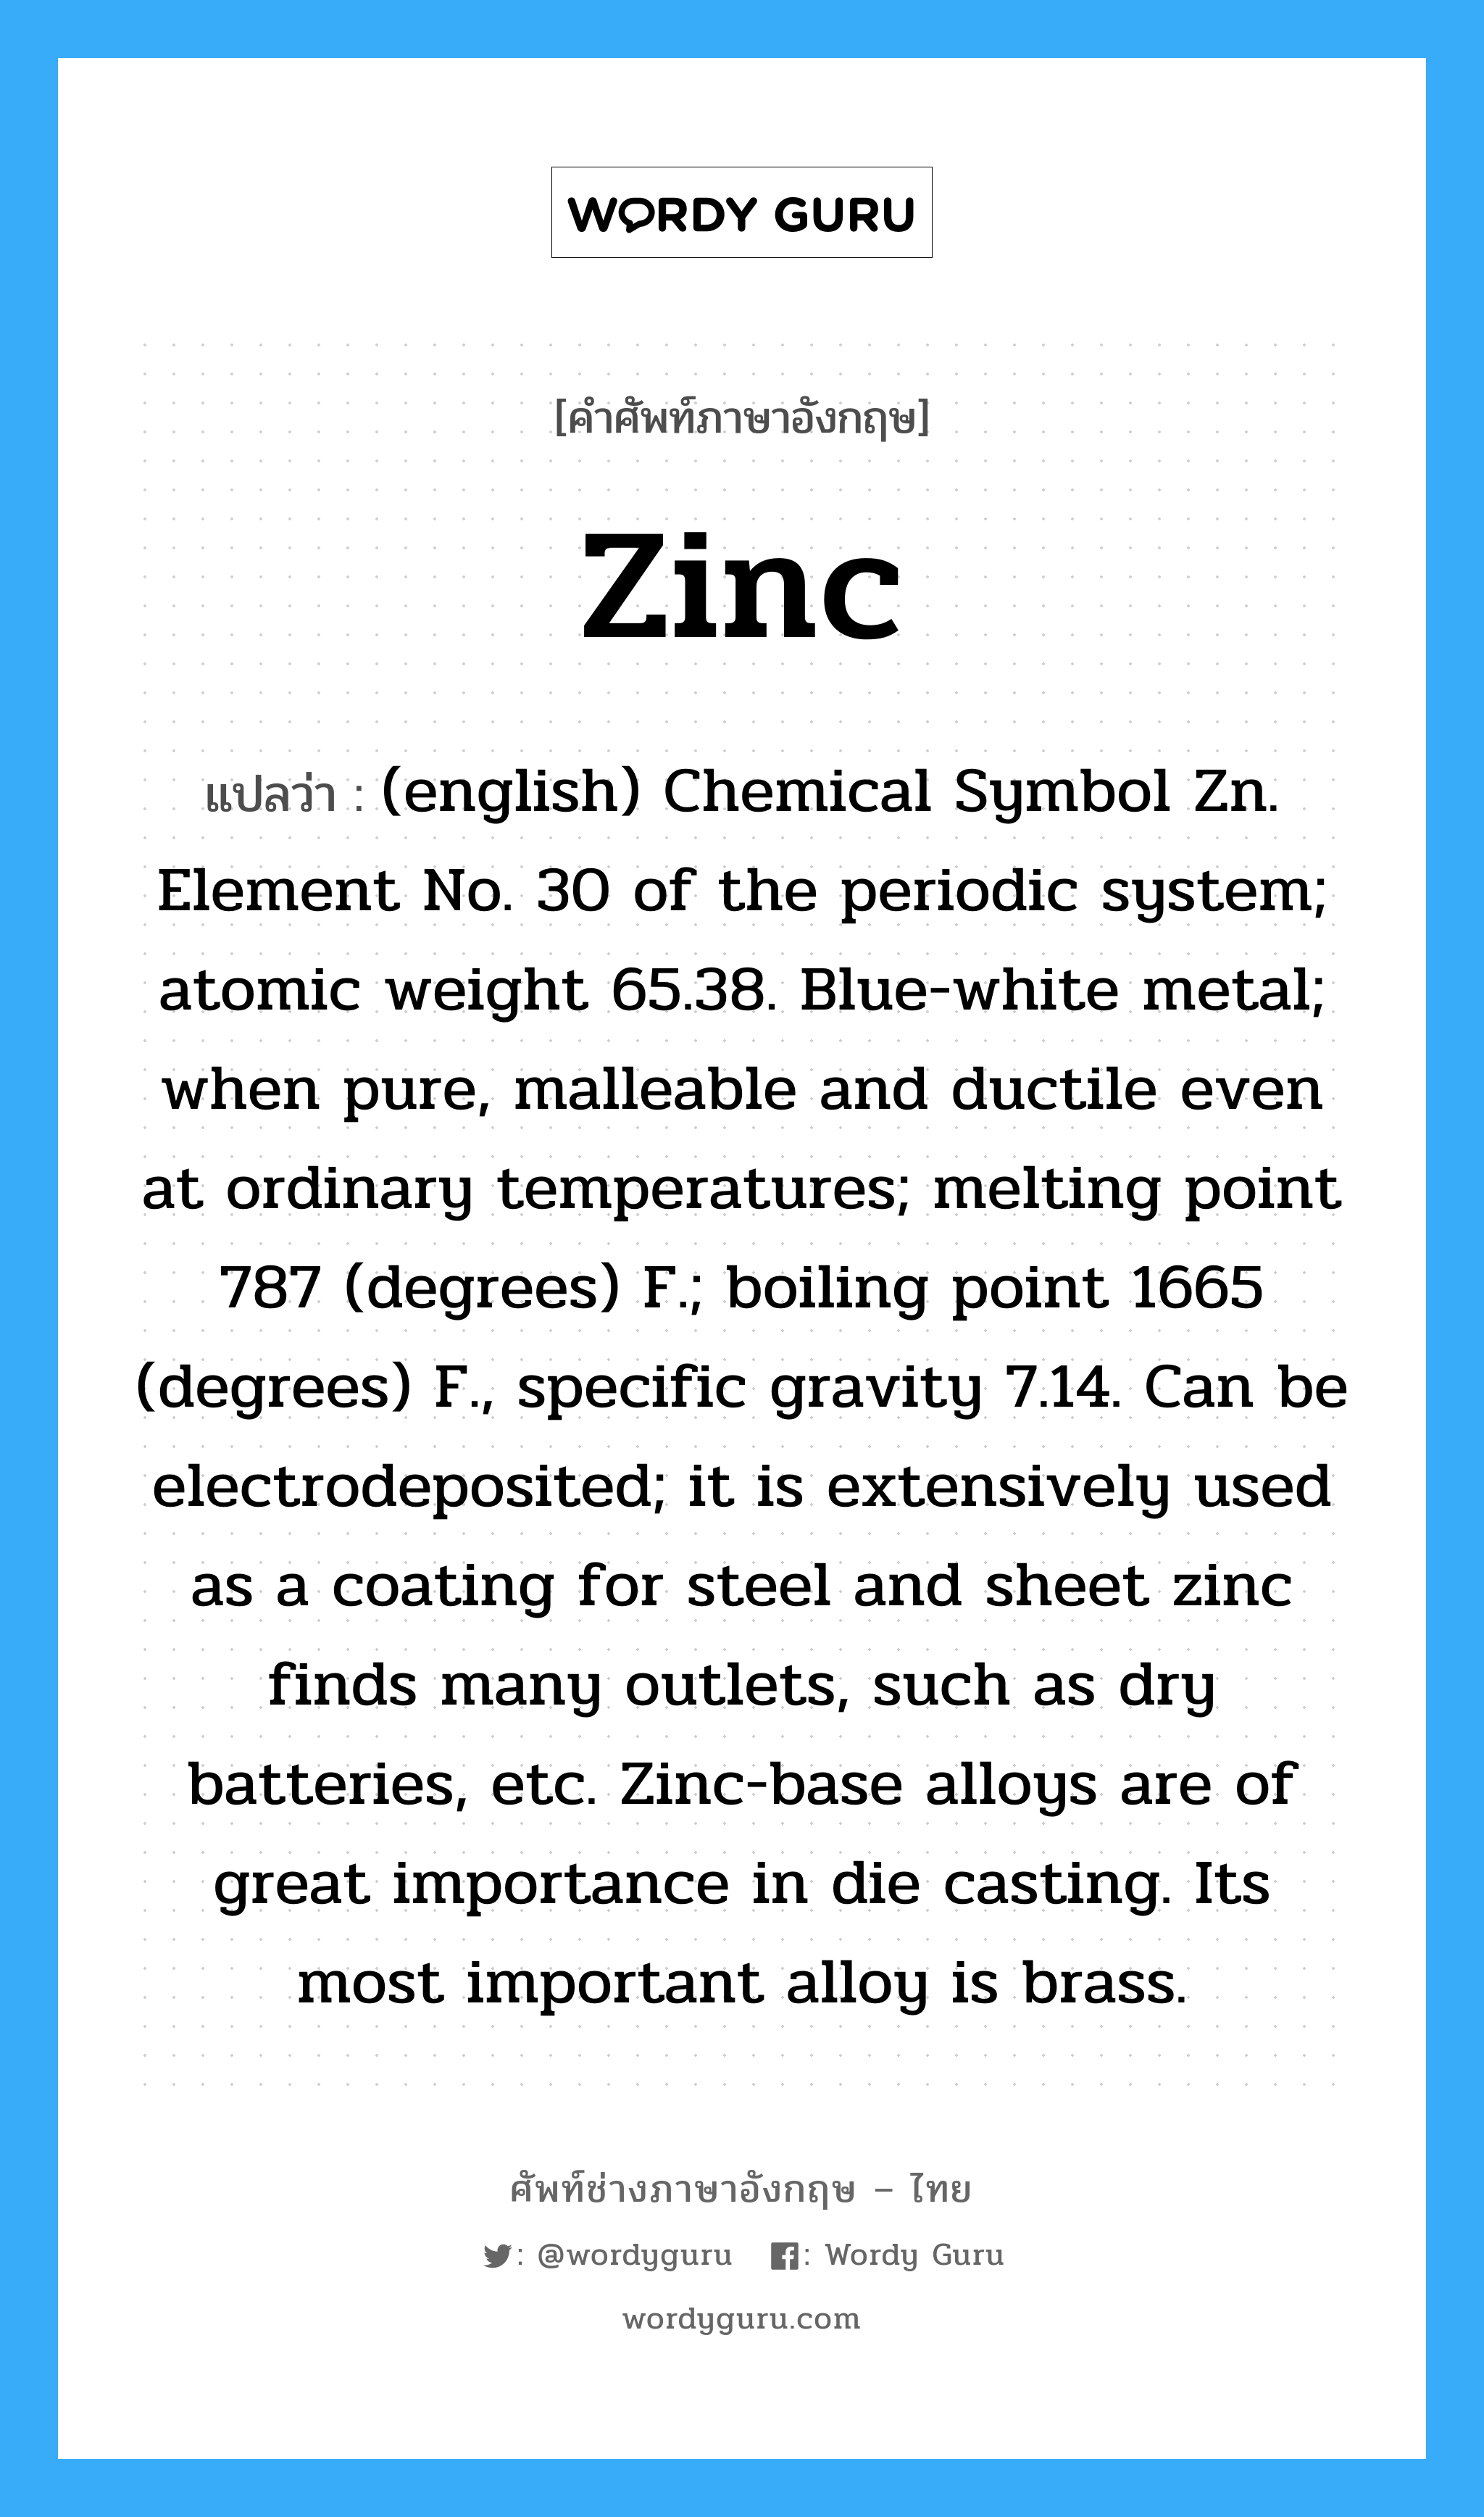 Zinc แปลว่า?, คำศัพท์ช่างภาษาอังกฤษ - ไทย Zinc คำศัพท์ภาษาอังกฤษ Zinc แปลว่า (english) Chemical Symbol Zn. Element No. 30 of the periodic system; atomic weight 65.38. Blue-white metal; when pure, malleable and ductile even at ordinary temperatures; melting point 787 (degrees) F.; boiling point 1665 (degrees) F., specific gravity 7.14. Can be electrodeposited; it is extensively used as a coating for steel and sheet zinc finds many outlets, such as dry batteries, etc. Zinc-base alloys are of great importance in die casting. Its most important alloy is brass.